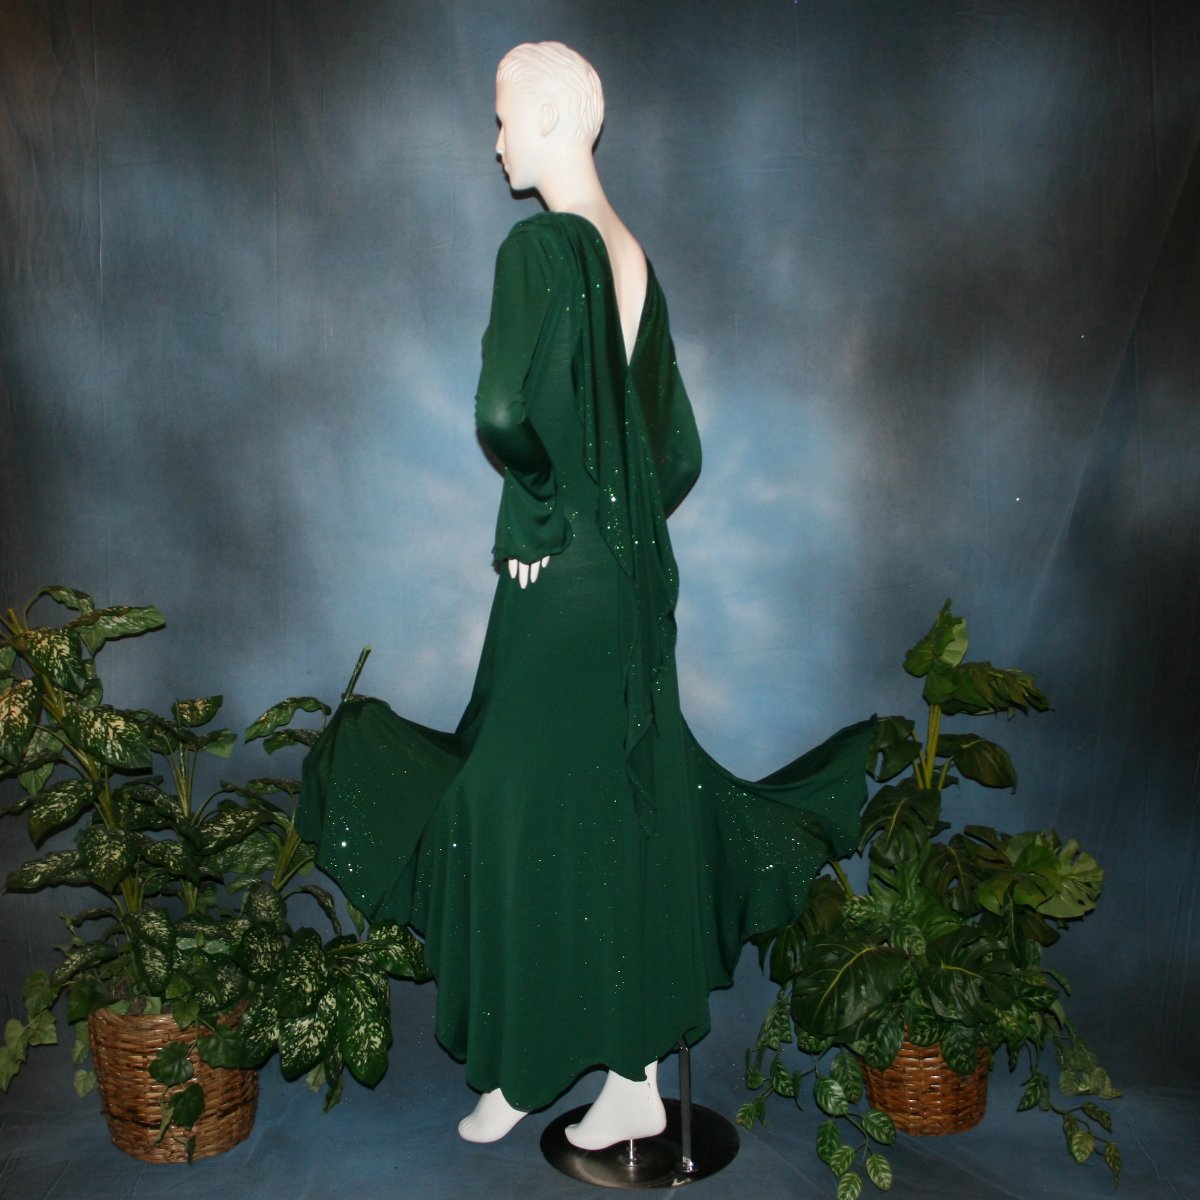 Crystal's Creations side view of Green social ballroom dress was created in luxurious deep emerald glitter slinky, with full  & flaring skirt bottom, long flair sleeves & draping trailing down the back makes this gorgeous dress very elegant & classy!